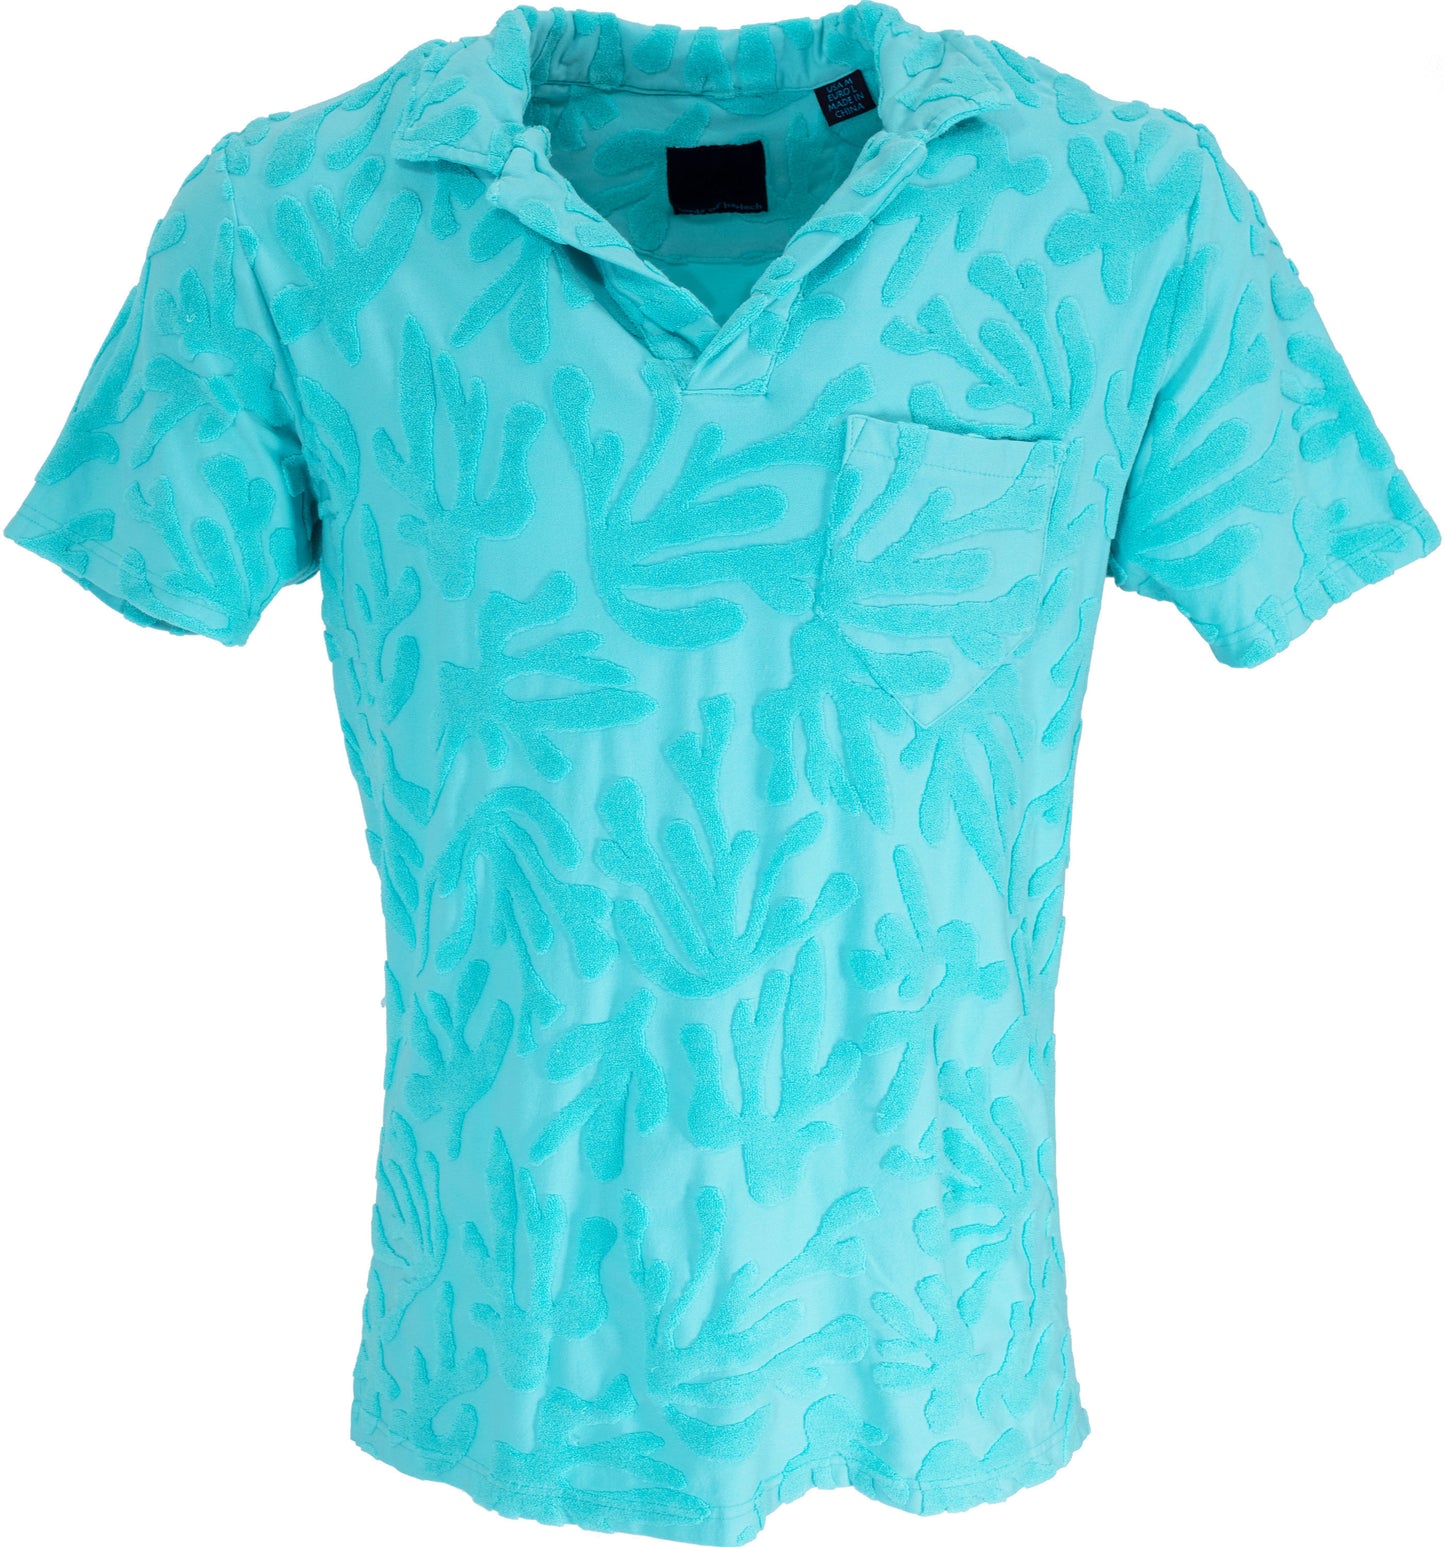 JOHNNY CORAL TOWEL POLO SHIRT IN LAGOON